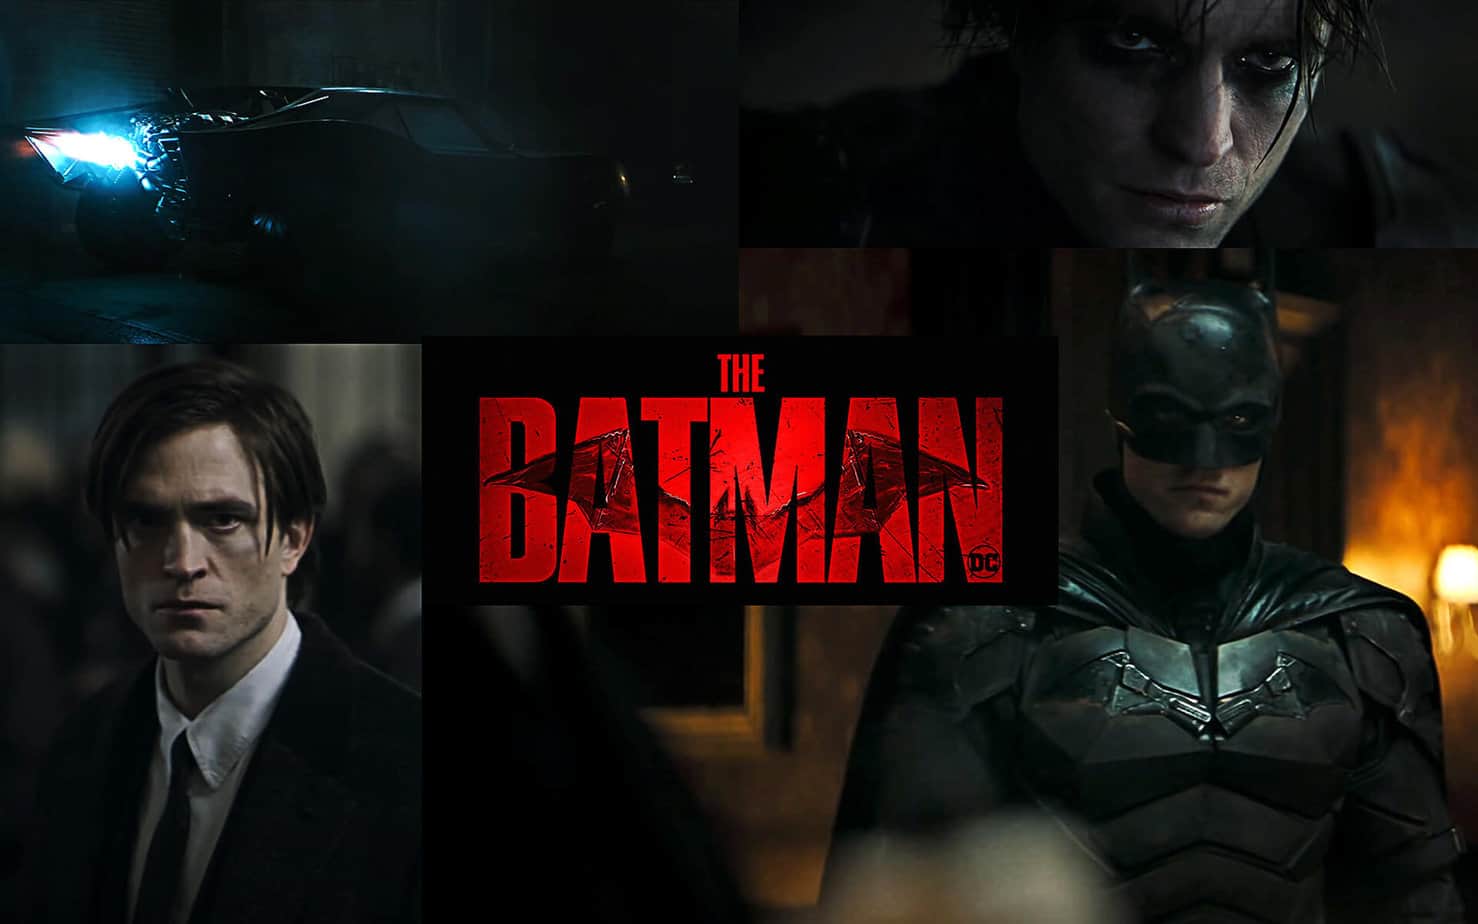 Opinion: Robert Pattinson is Going to Take Batman to Another Level